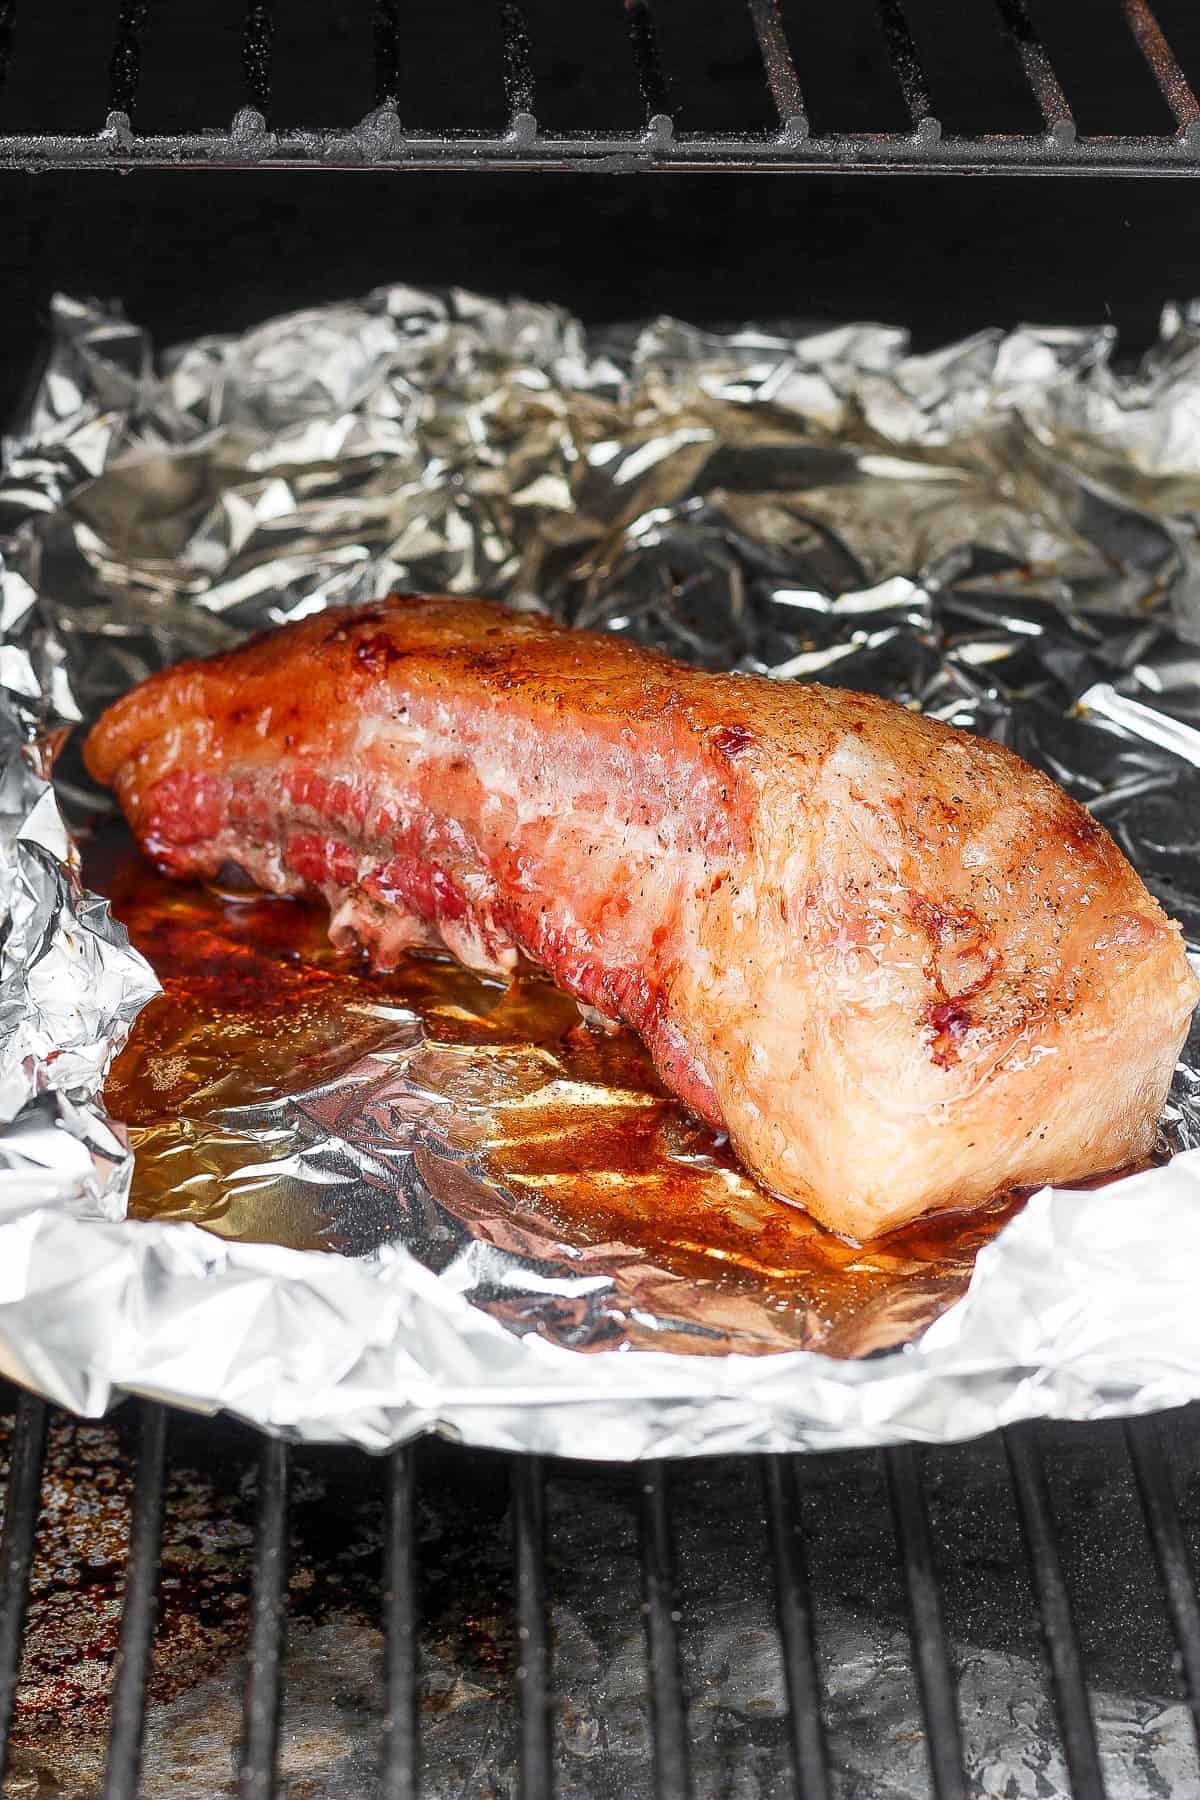 A slab of pork belly sitting in some tin foil on the smoker.